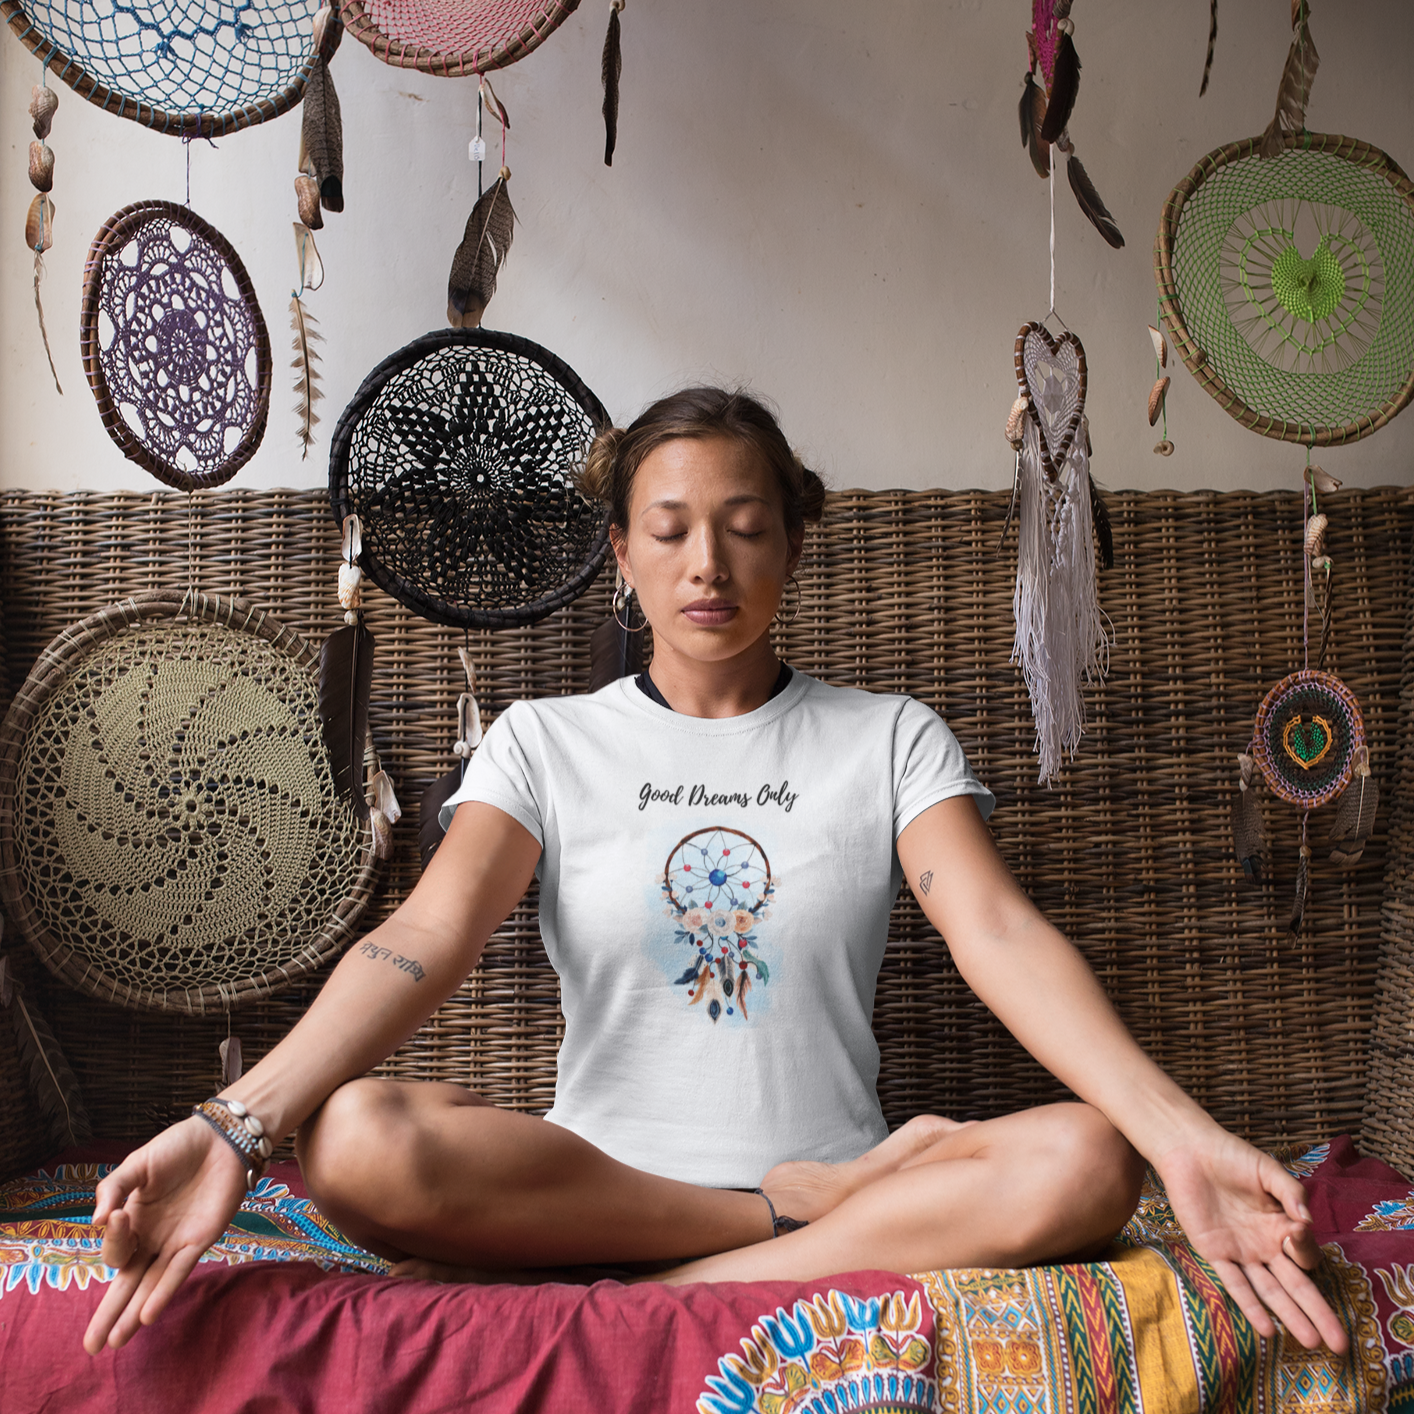 Story of Awakening Lifestyle Community Spirituality Relationships Love Light Meditation Oneness Earth Balance Healing Shop Store Charity Tree Nature Read Write T shirt Tops Tees Clothing Women Horoscope Organic Good Dreams Only Dream Catcher Quote